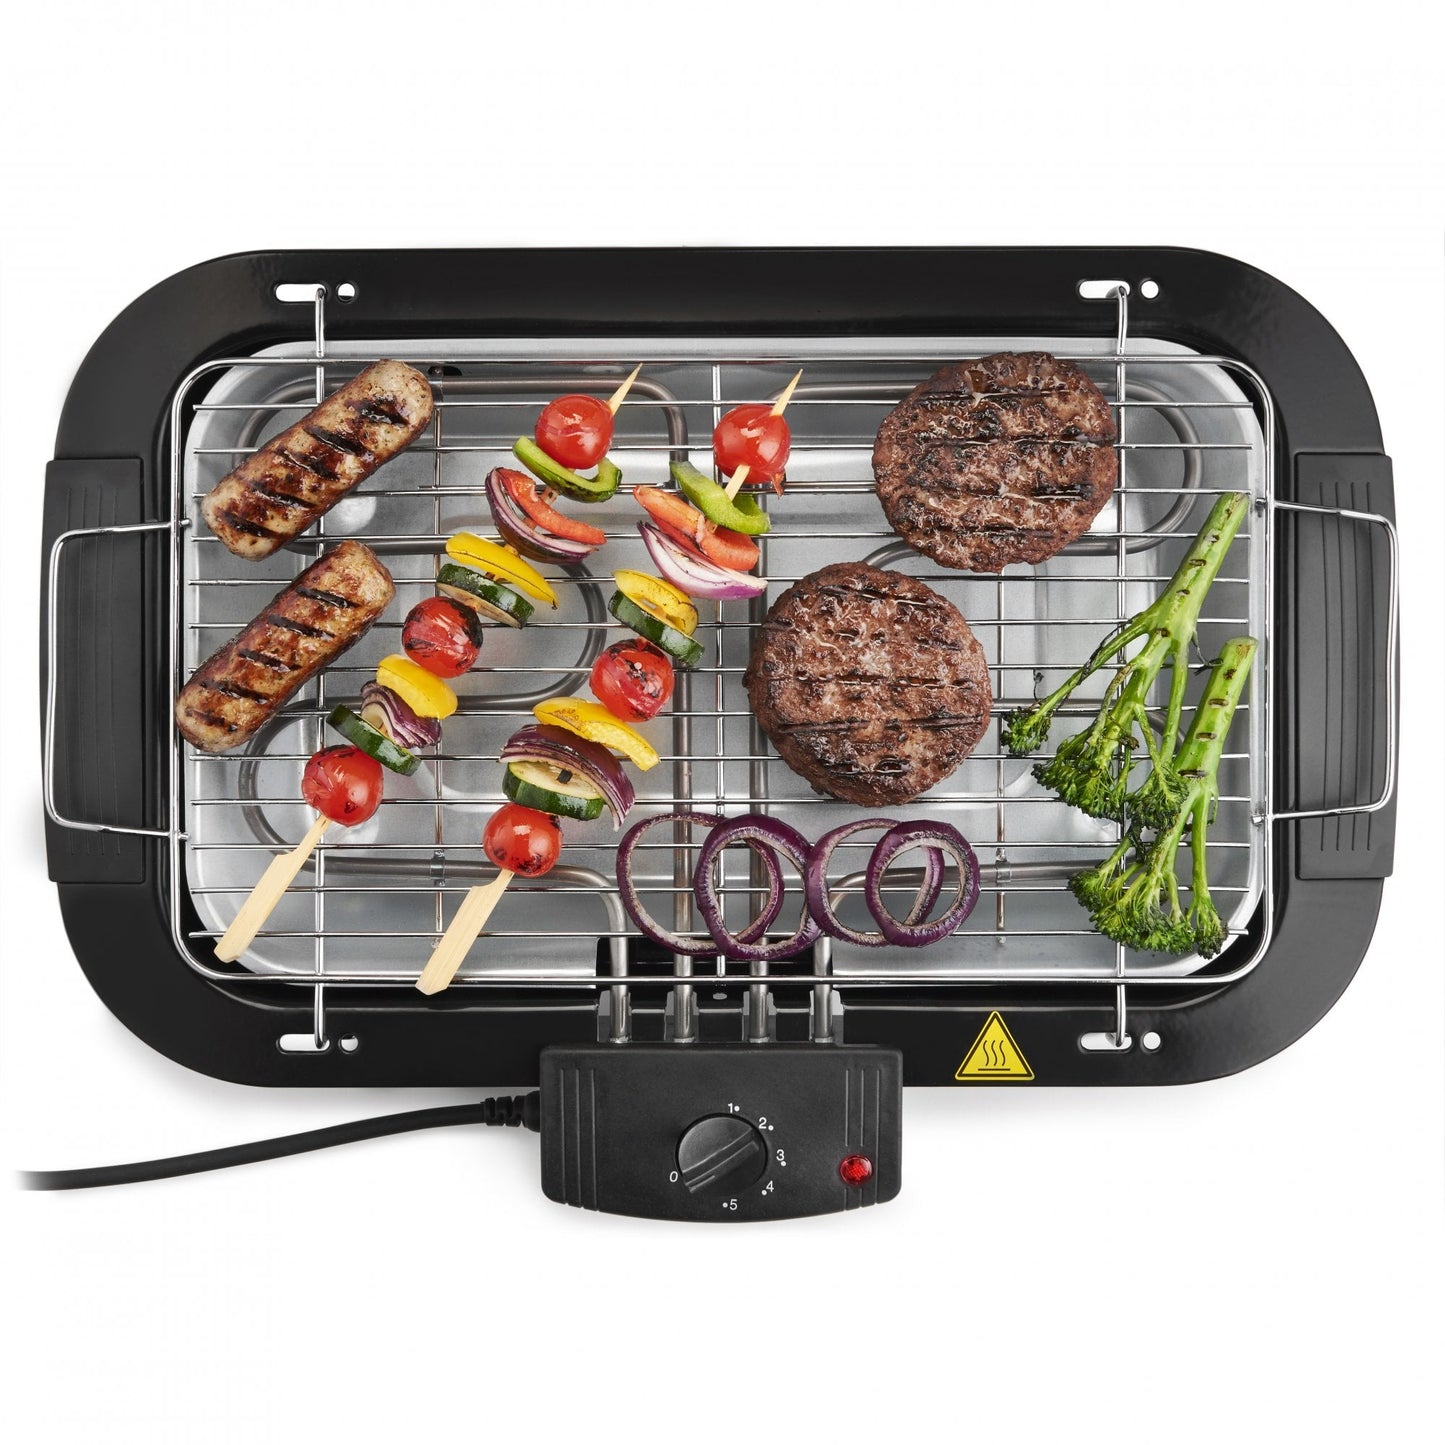 Lewis's Electric BBQ Grill